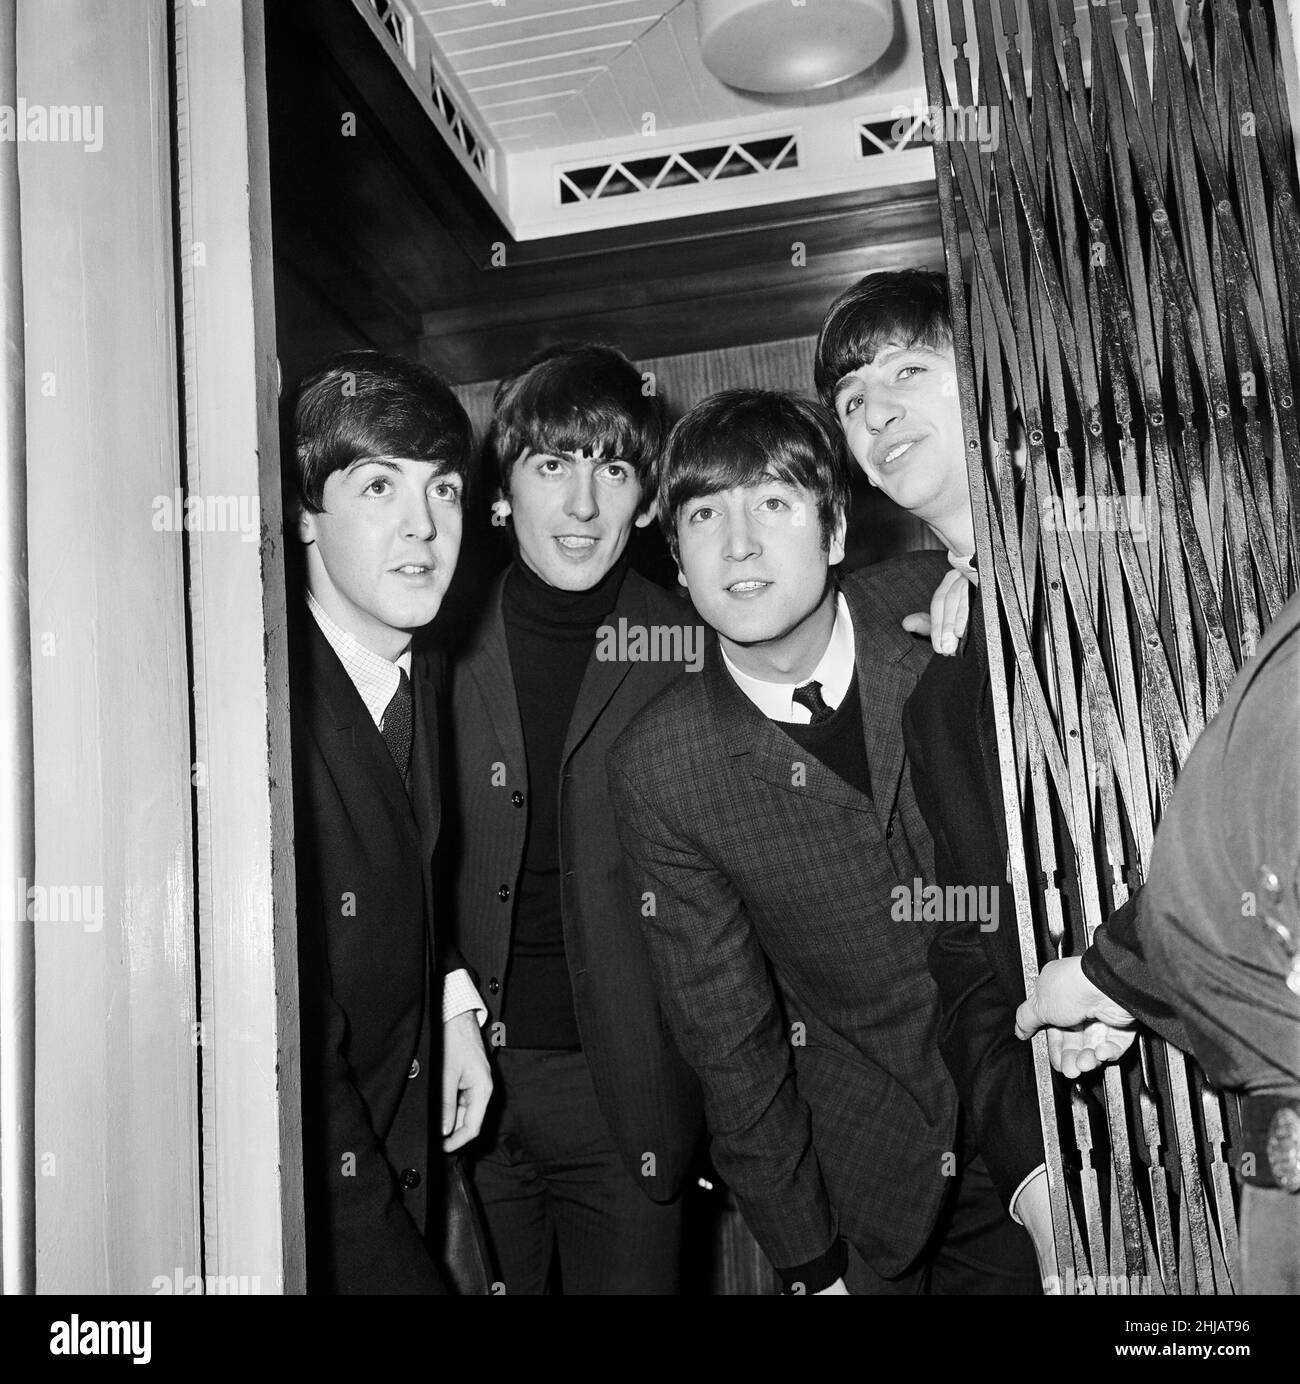 Der 21st. November war das Datum der Beatles Herbst-Tour 1963 im Jahr 17th. Ihre Setlist enthielt 10 Songs: I saw her Standing There, From Me to You, All My Loving, You Really Goed A Hold on Me, Roll Over Beethoven, Boys, Till There Was You, She Loves You, Money (That's What I Want) und Twist and Shout.(Bilderserien) die Beatles Backstage. (Von links nach rechts) Paul McCartney, George Harrison, John Lennon und Ringo Starr. Stockfoto